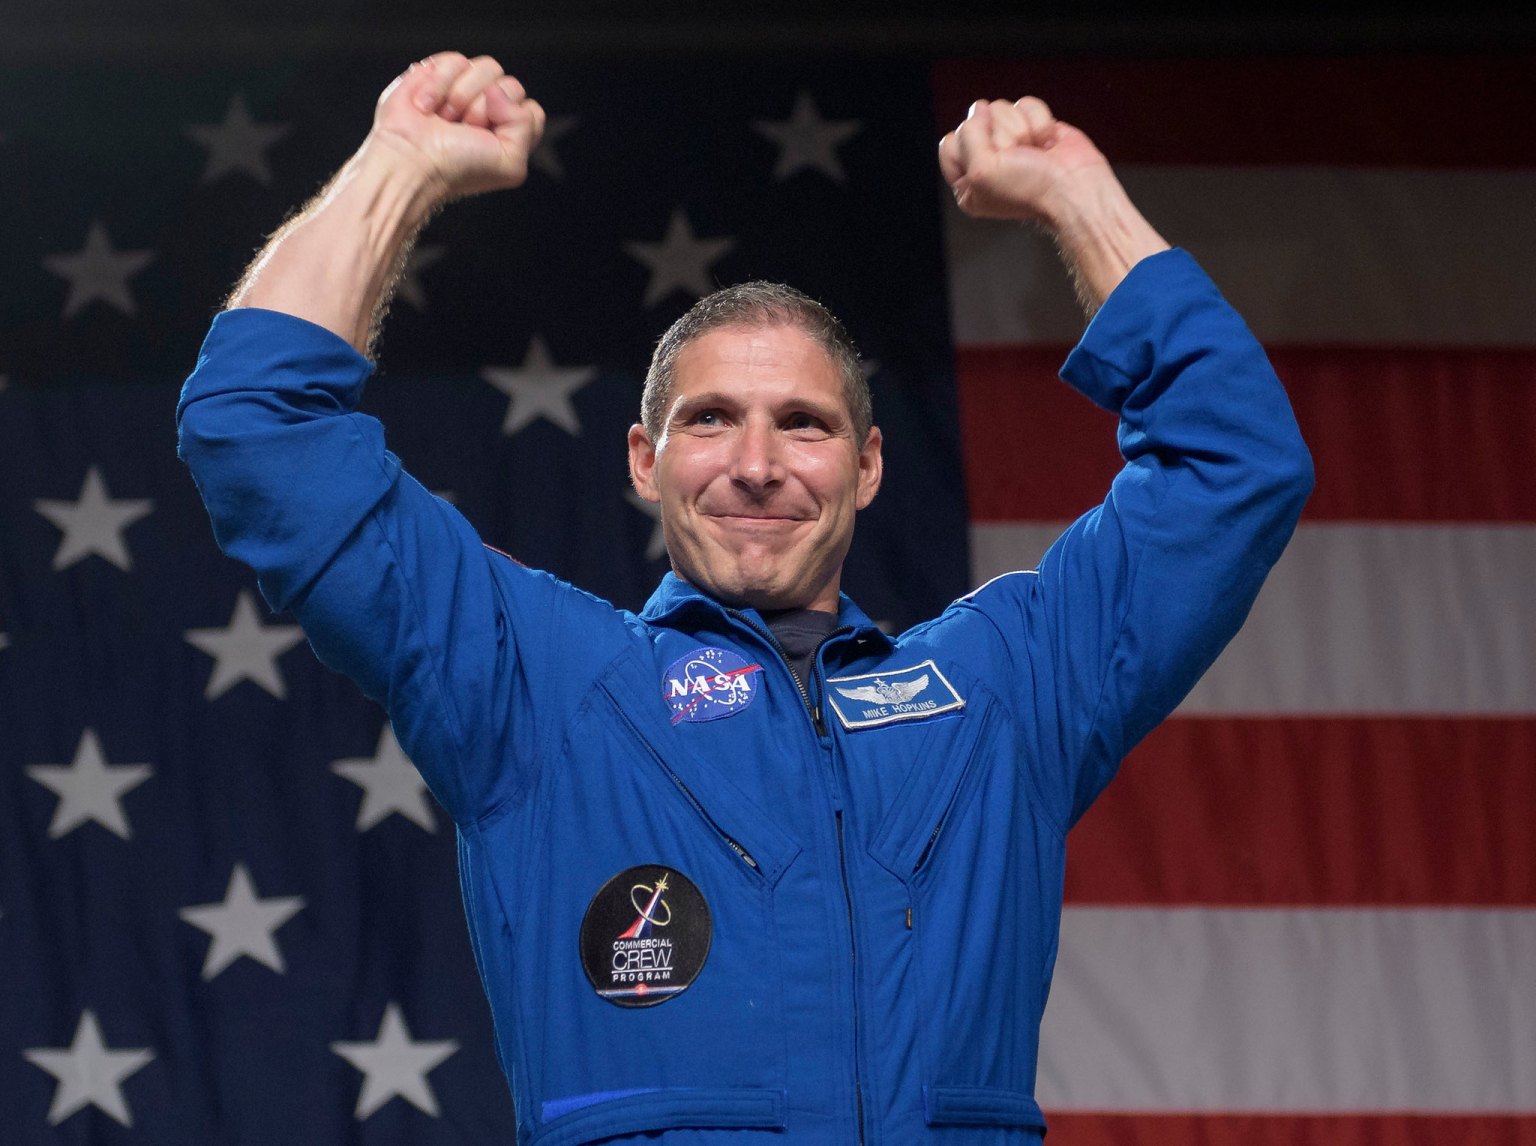 NASA astronaut Mike Hopkins is seen during a NASA event where it was announced that he, and NASA astronaut Victor Glover are assigned to the first mission to the International Space Station onboard SpaceX’s Crew Dragon